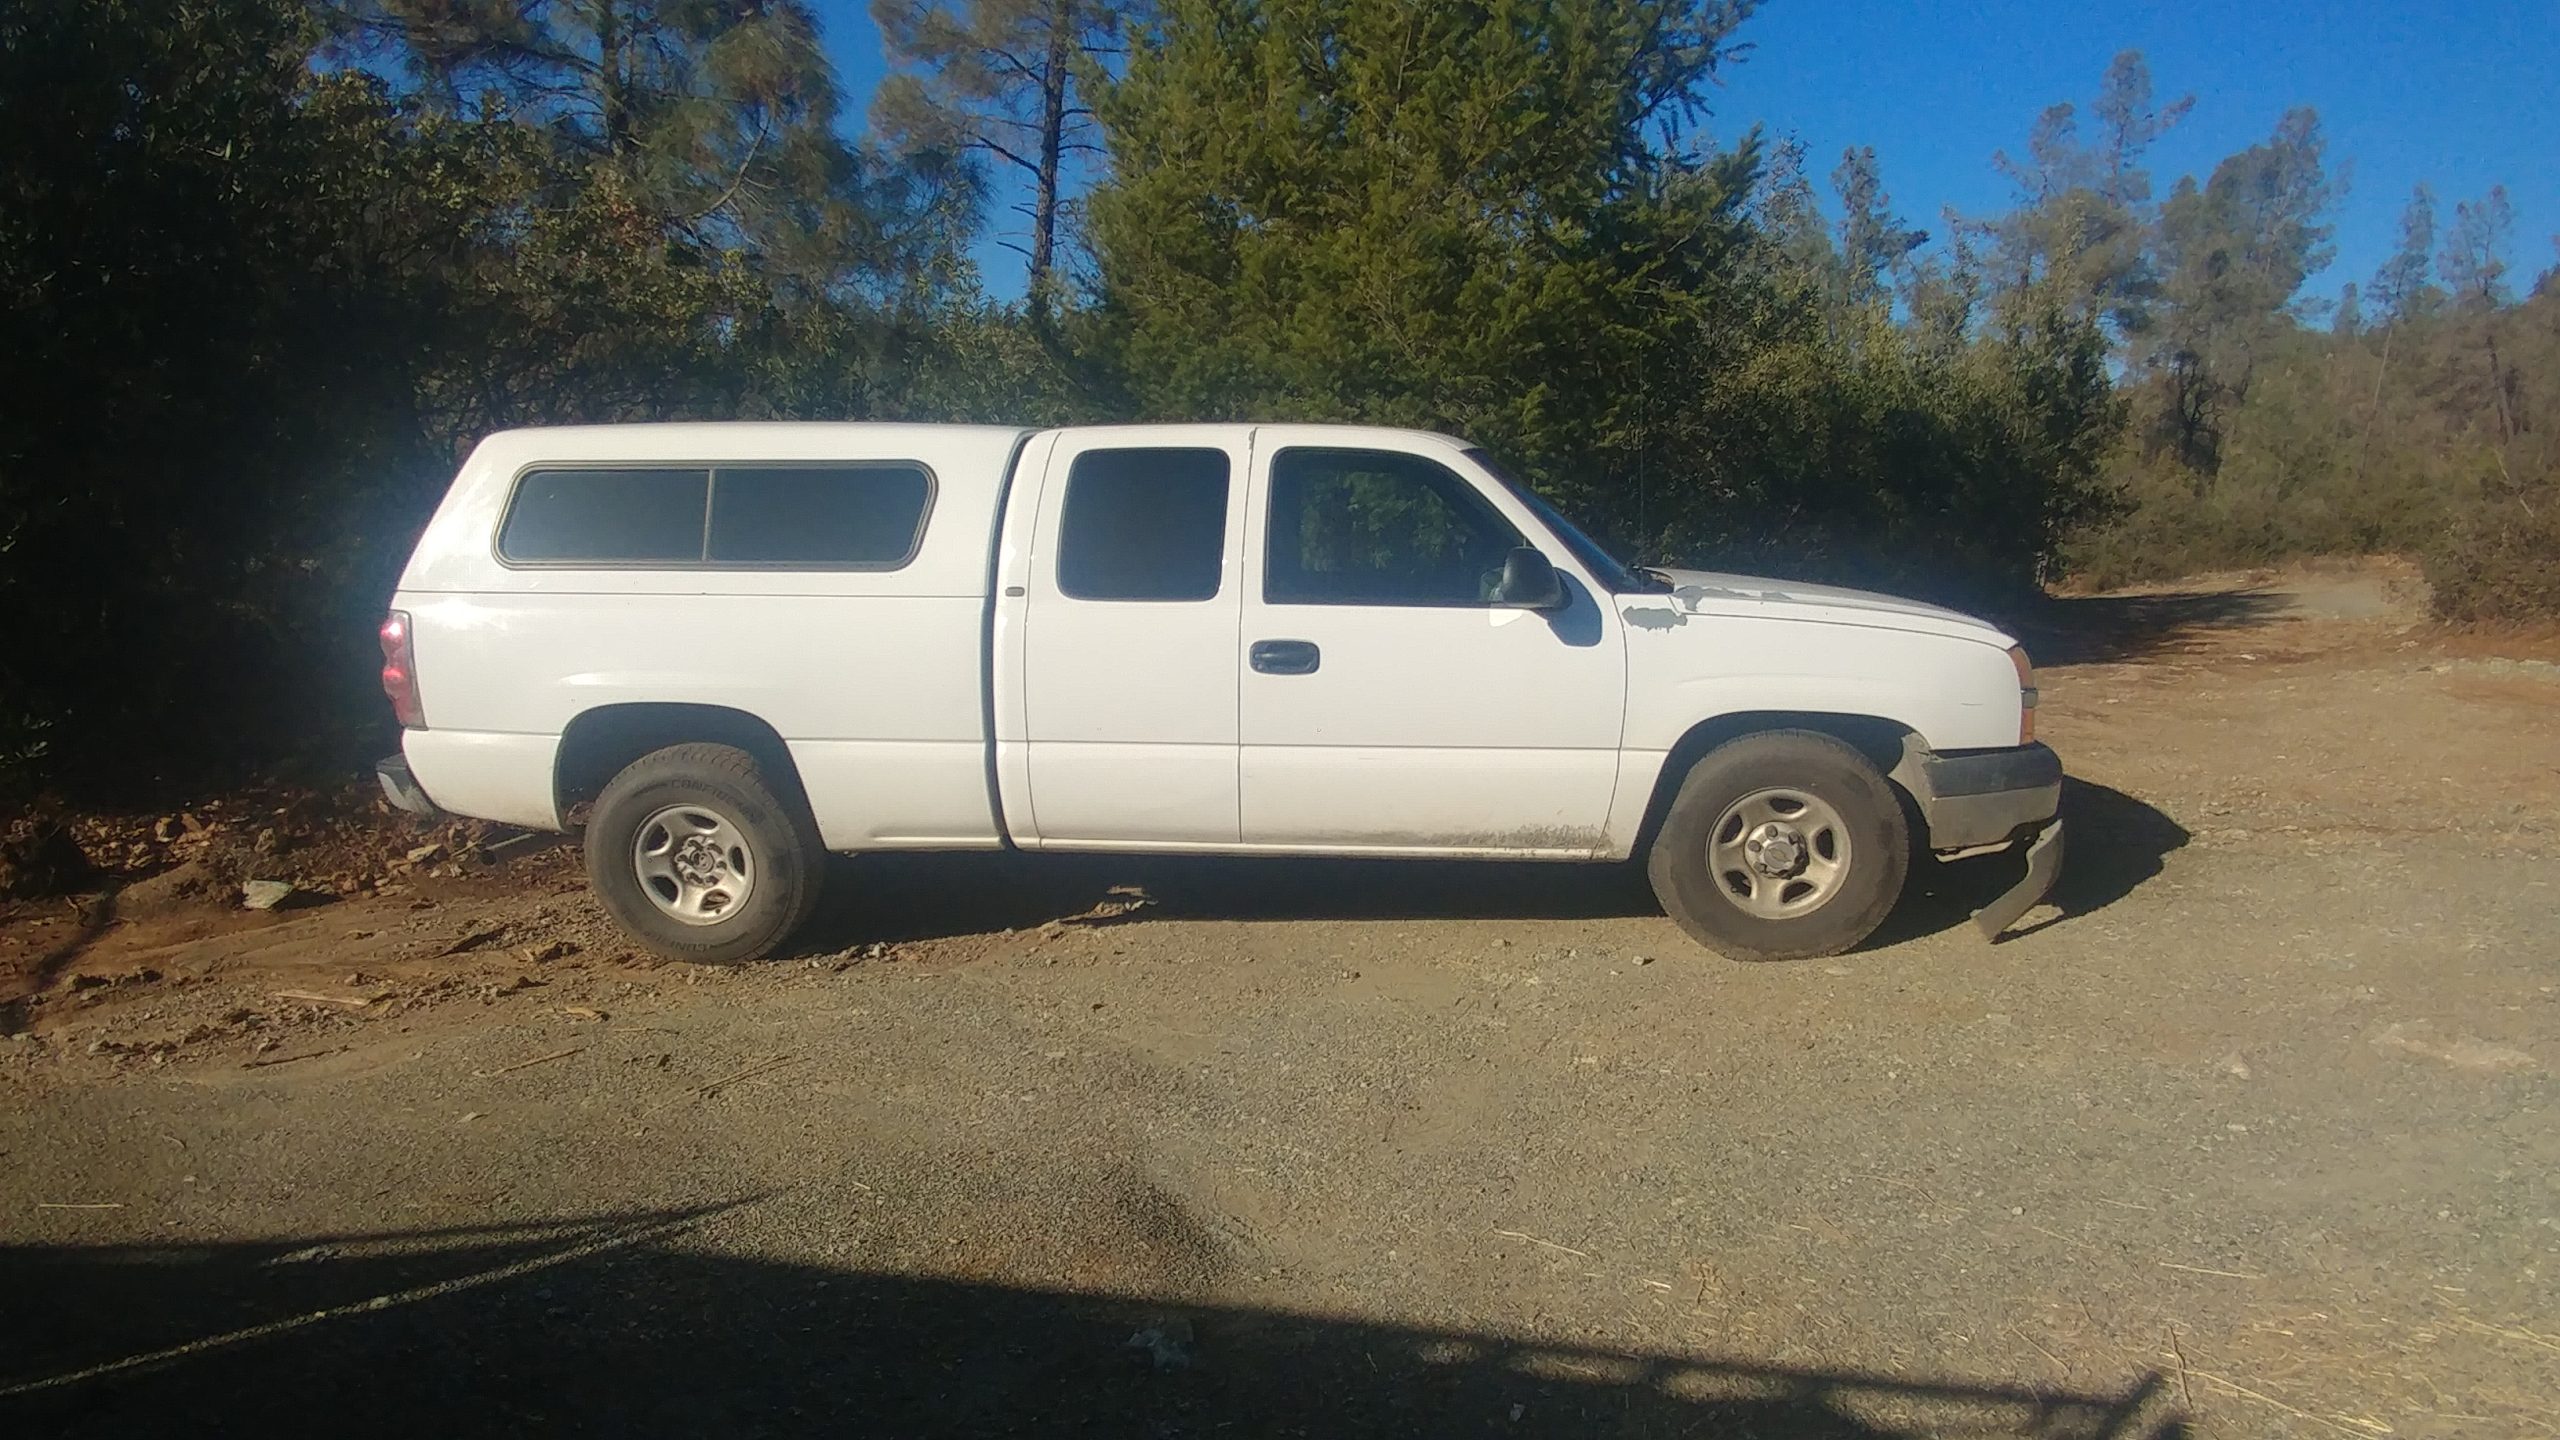 On top of losing pretty much everything, the truck that has been a major part of saving litterally hundreds of dogs has broken down so we are looking for a donatation of a running pickup.